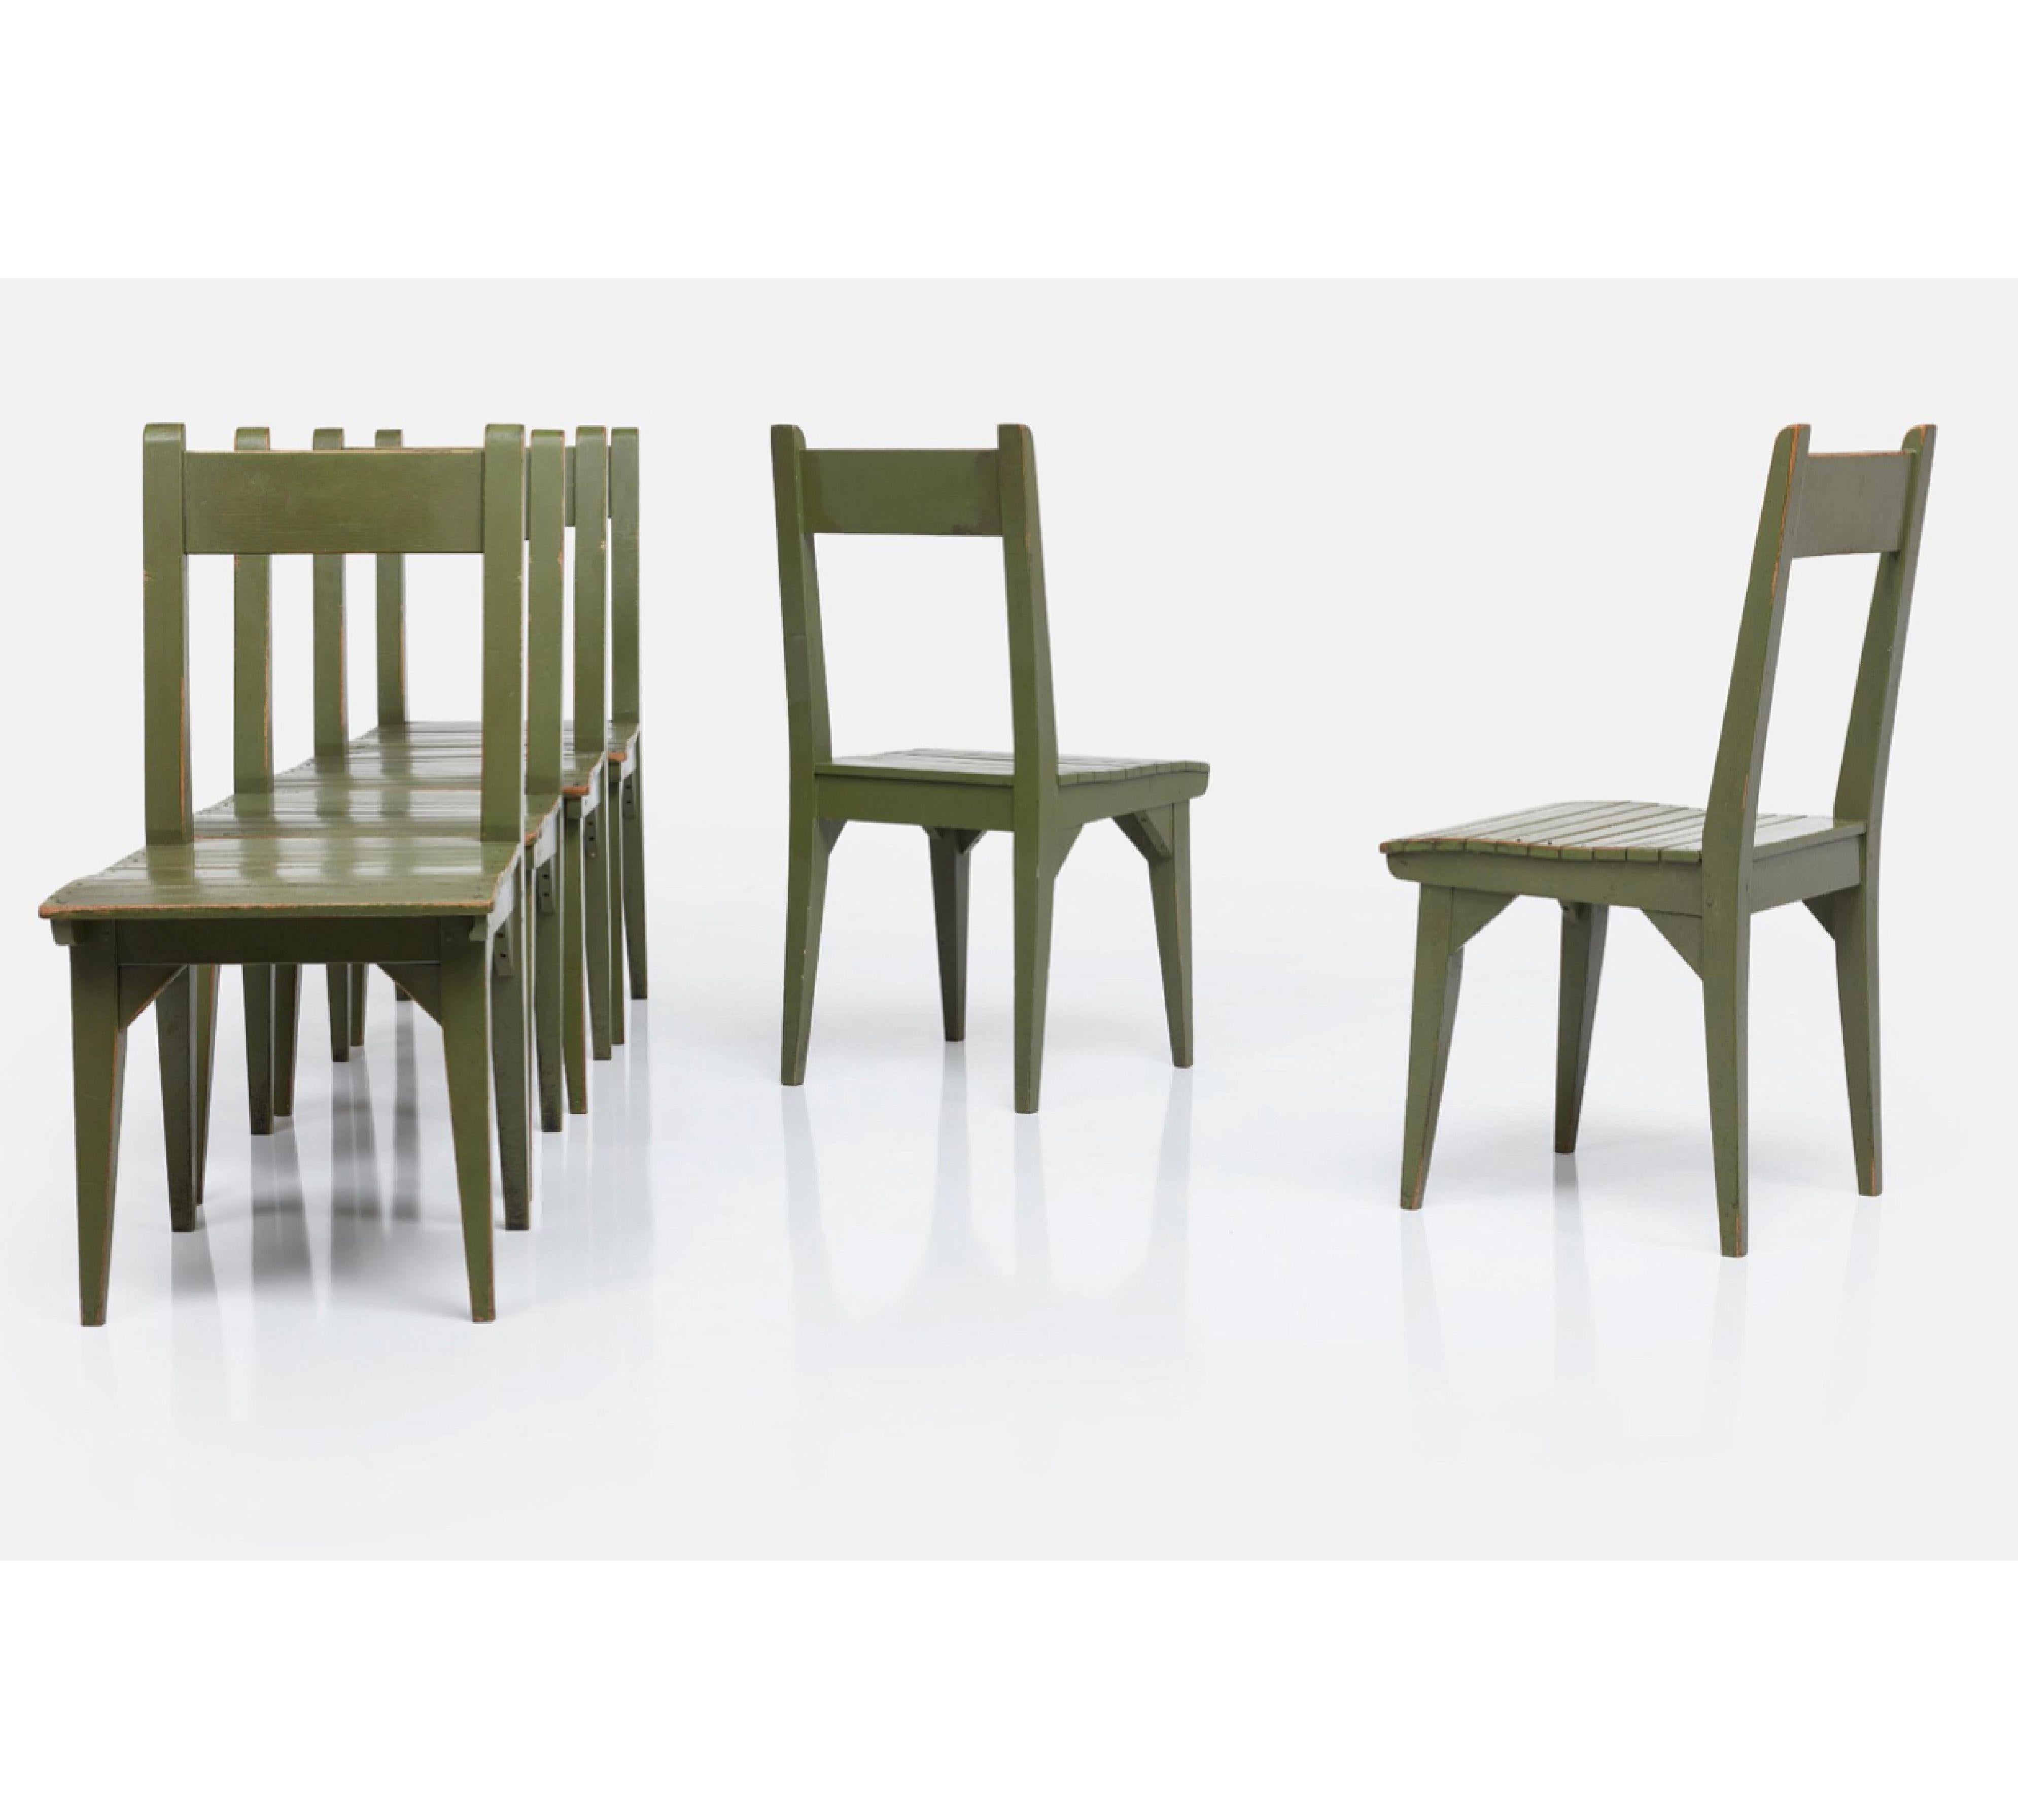 Post-Modern Roy McMakin Painted Wood Postmodern Dining Chair, Green, 1982, USA. For Sale